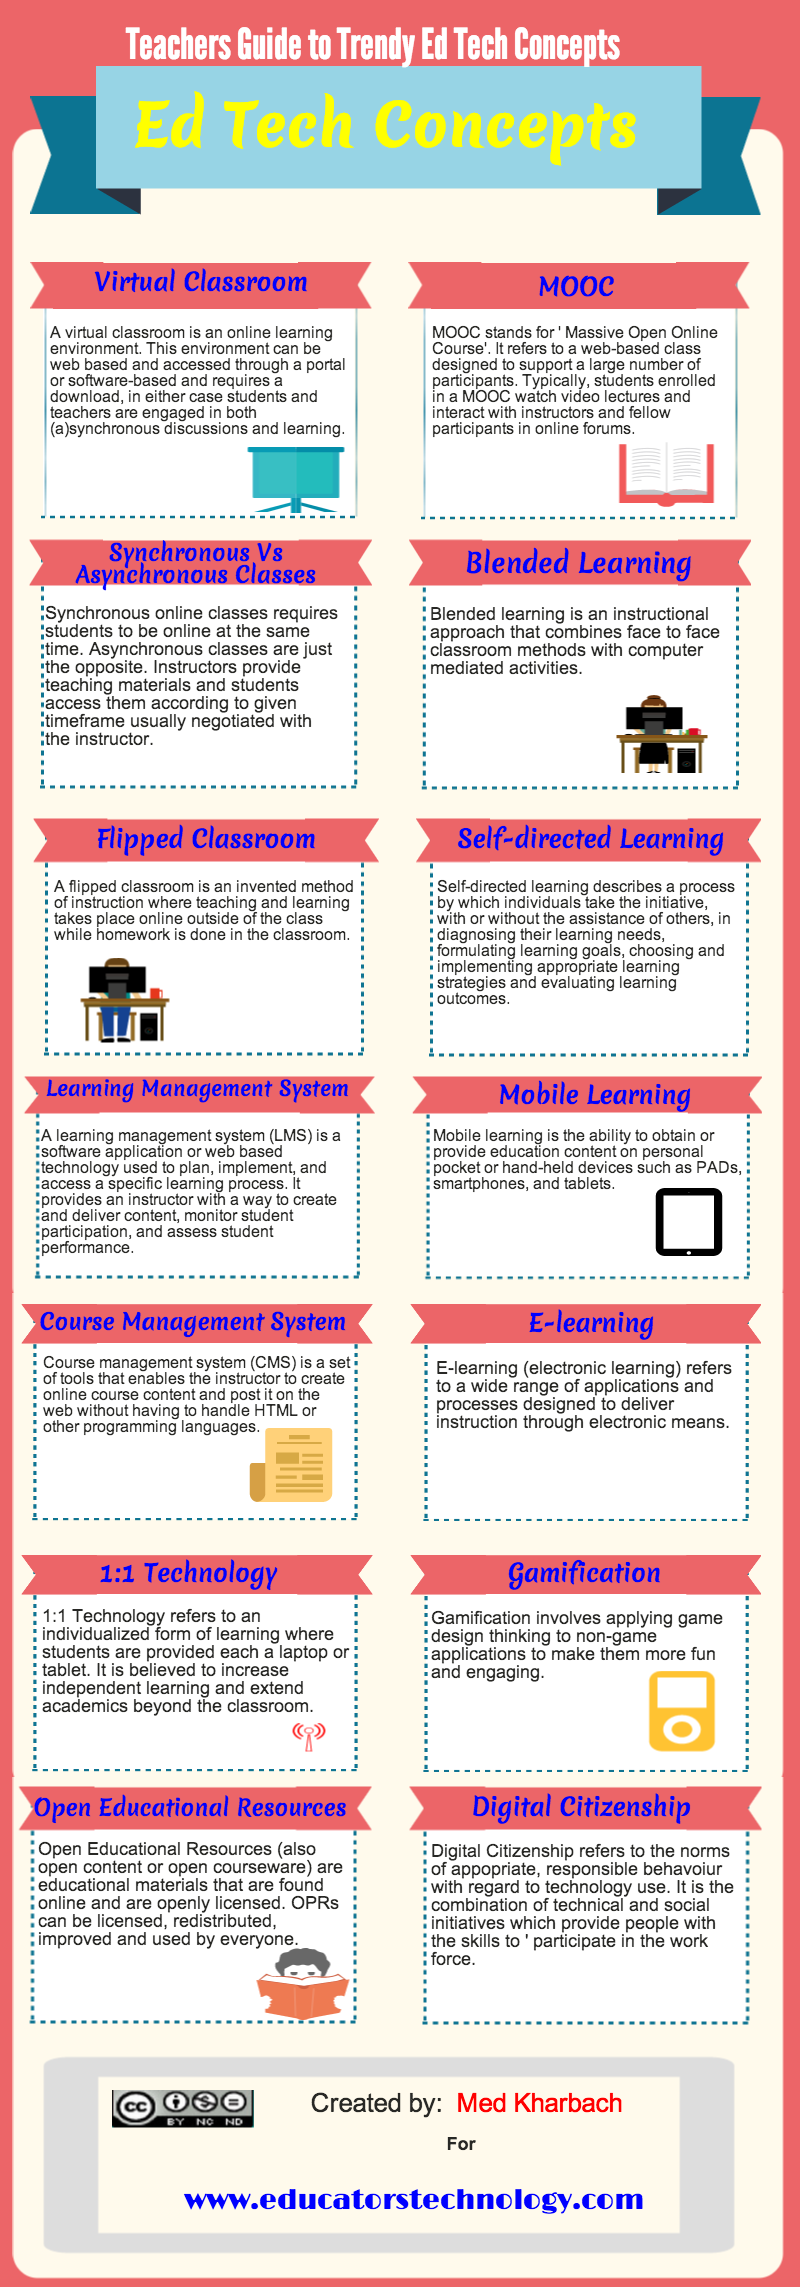 Teachers Guide to Trendy Ed Tech Concepts (Infograph)